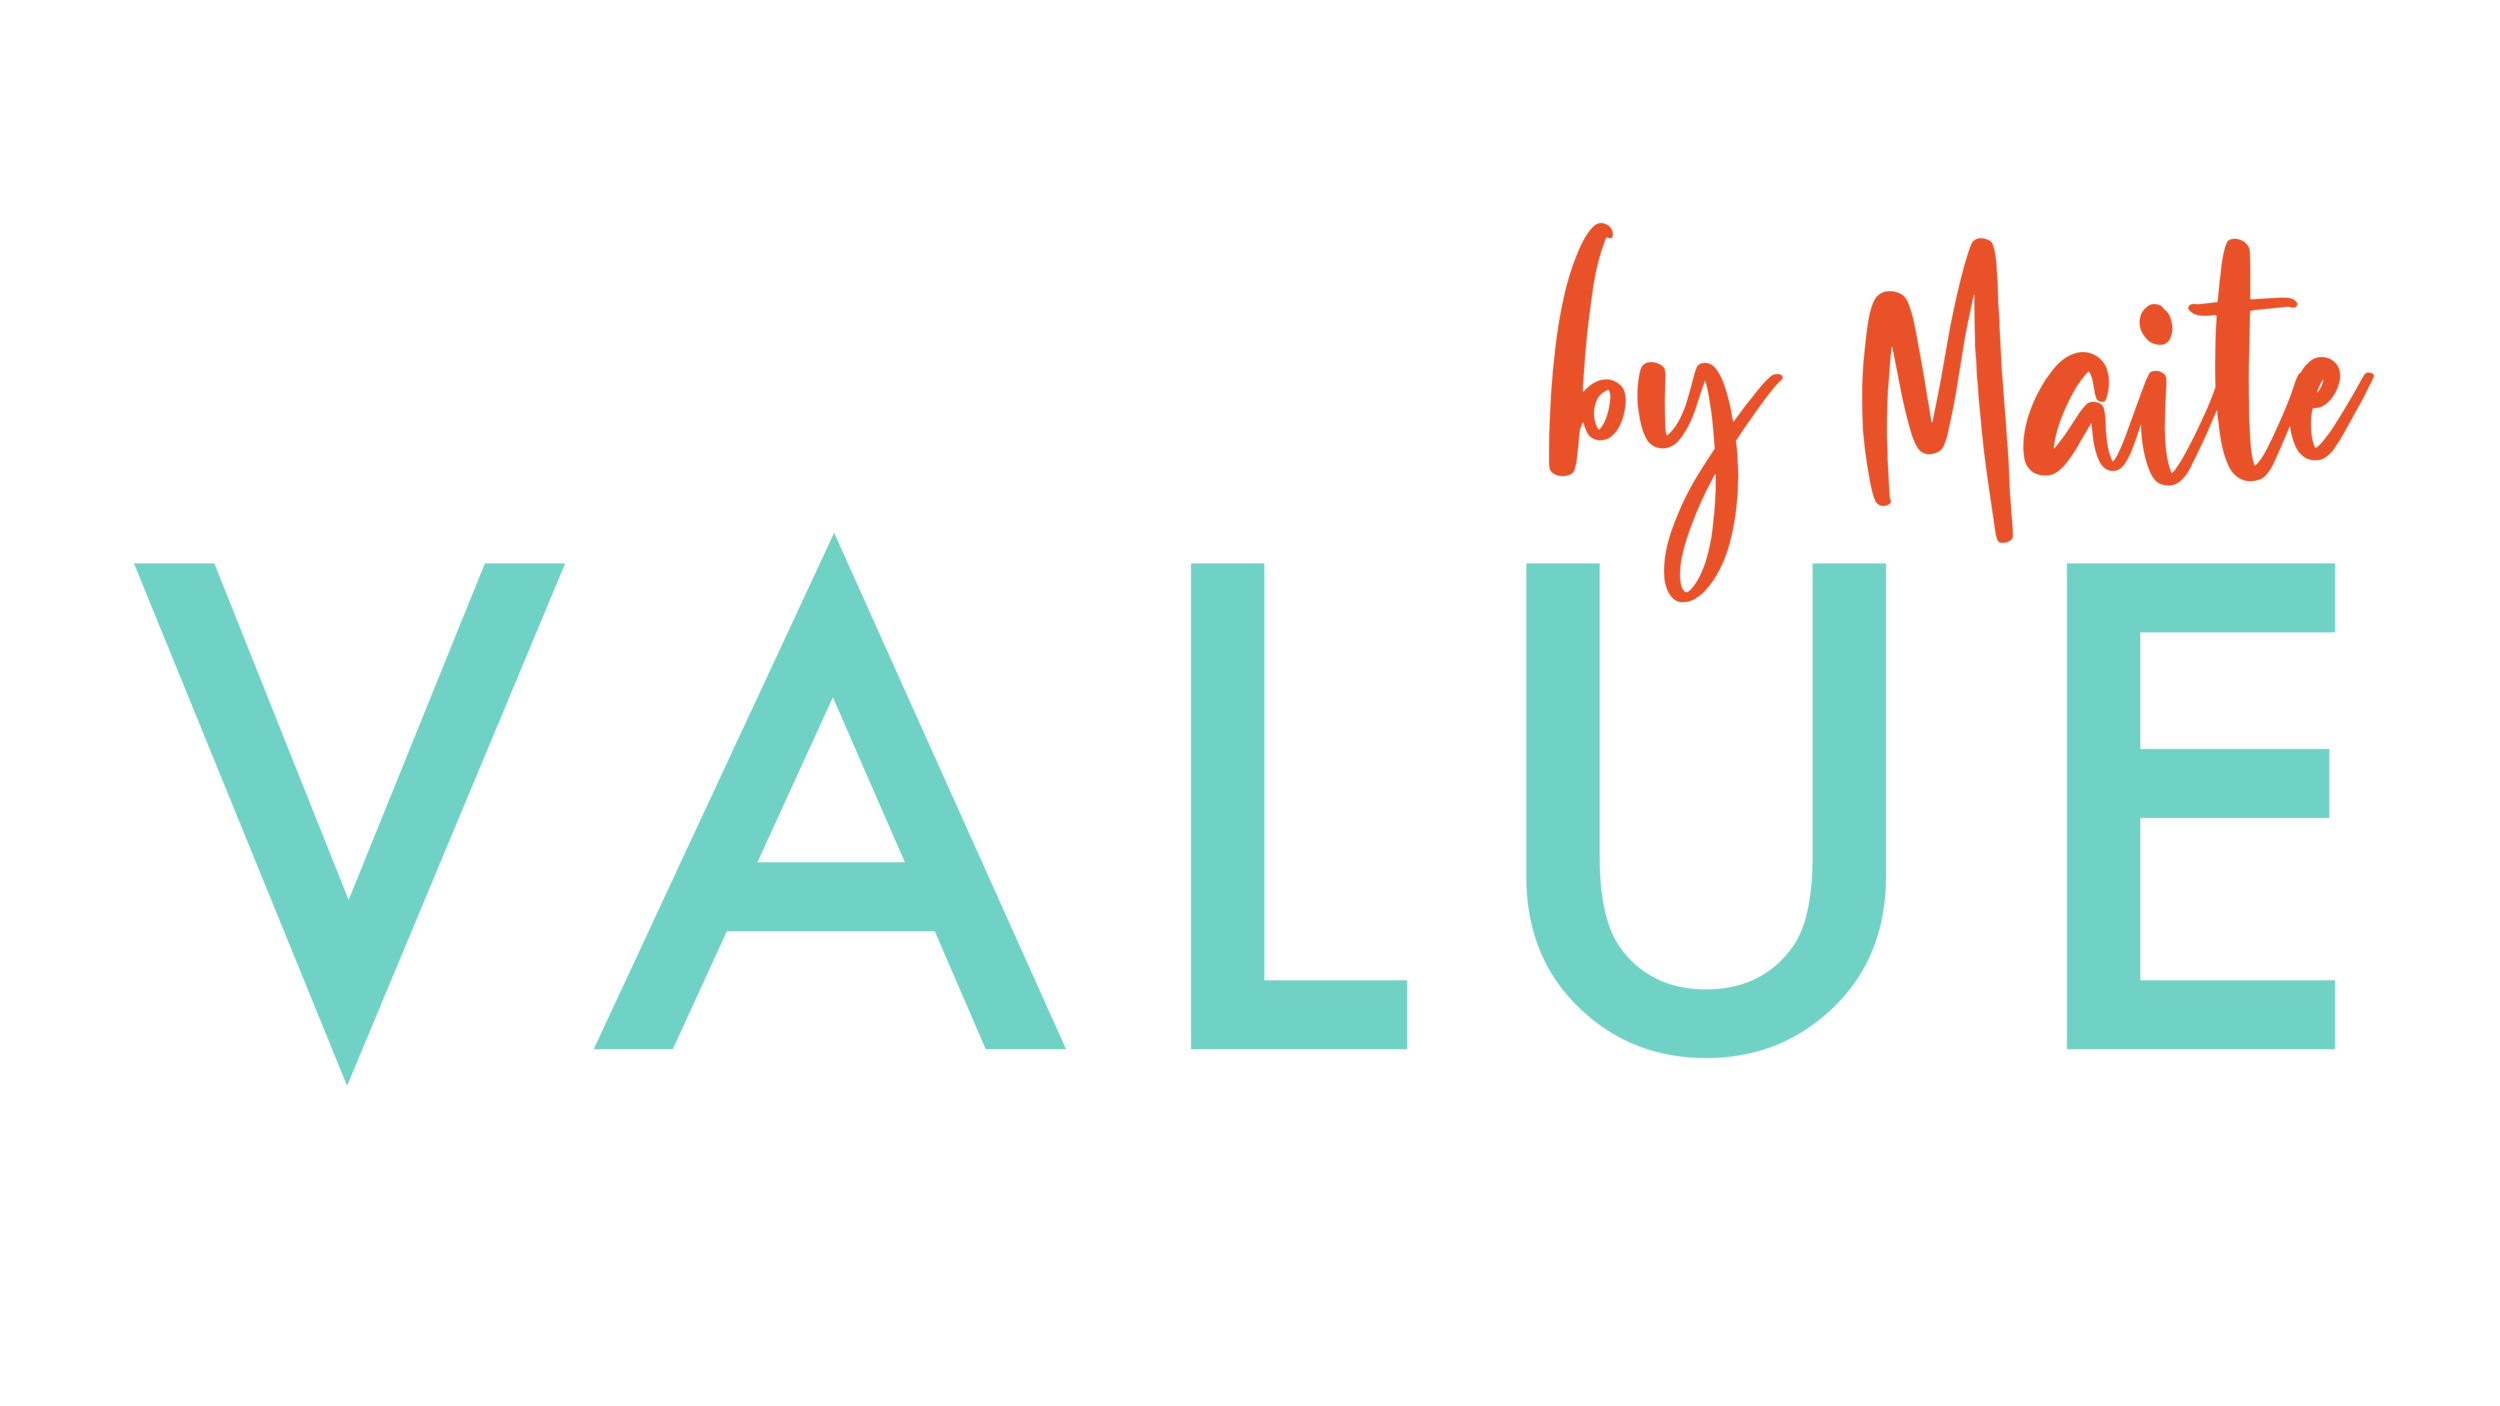 Value by Maite - Creating positive impact on society